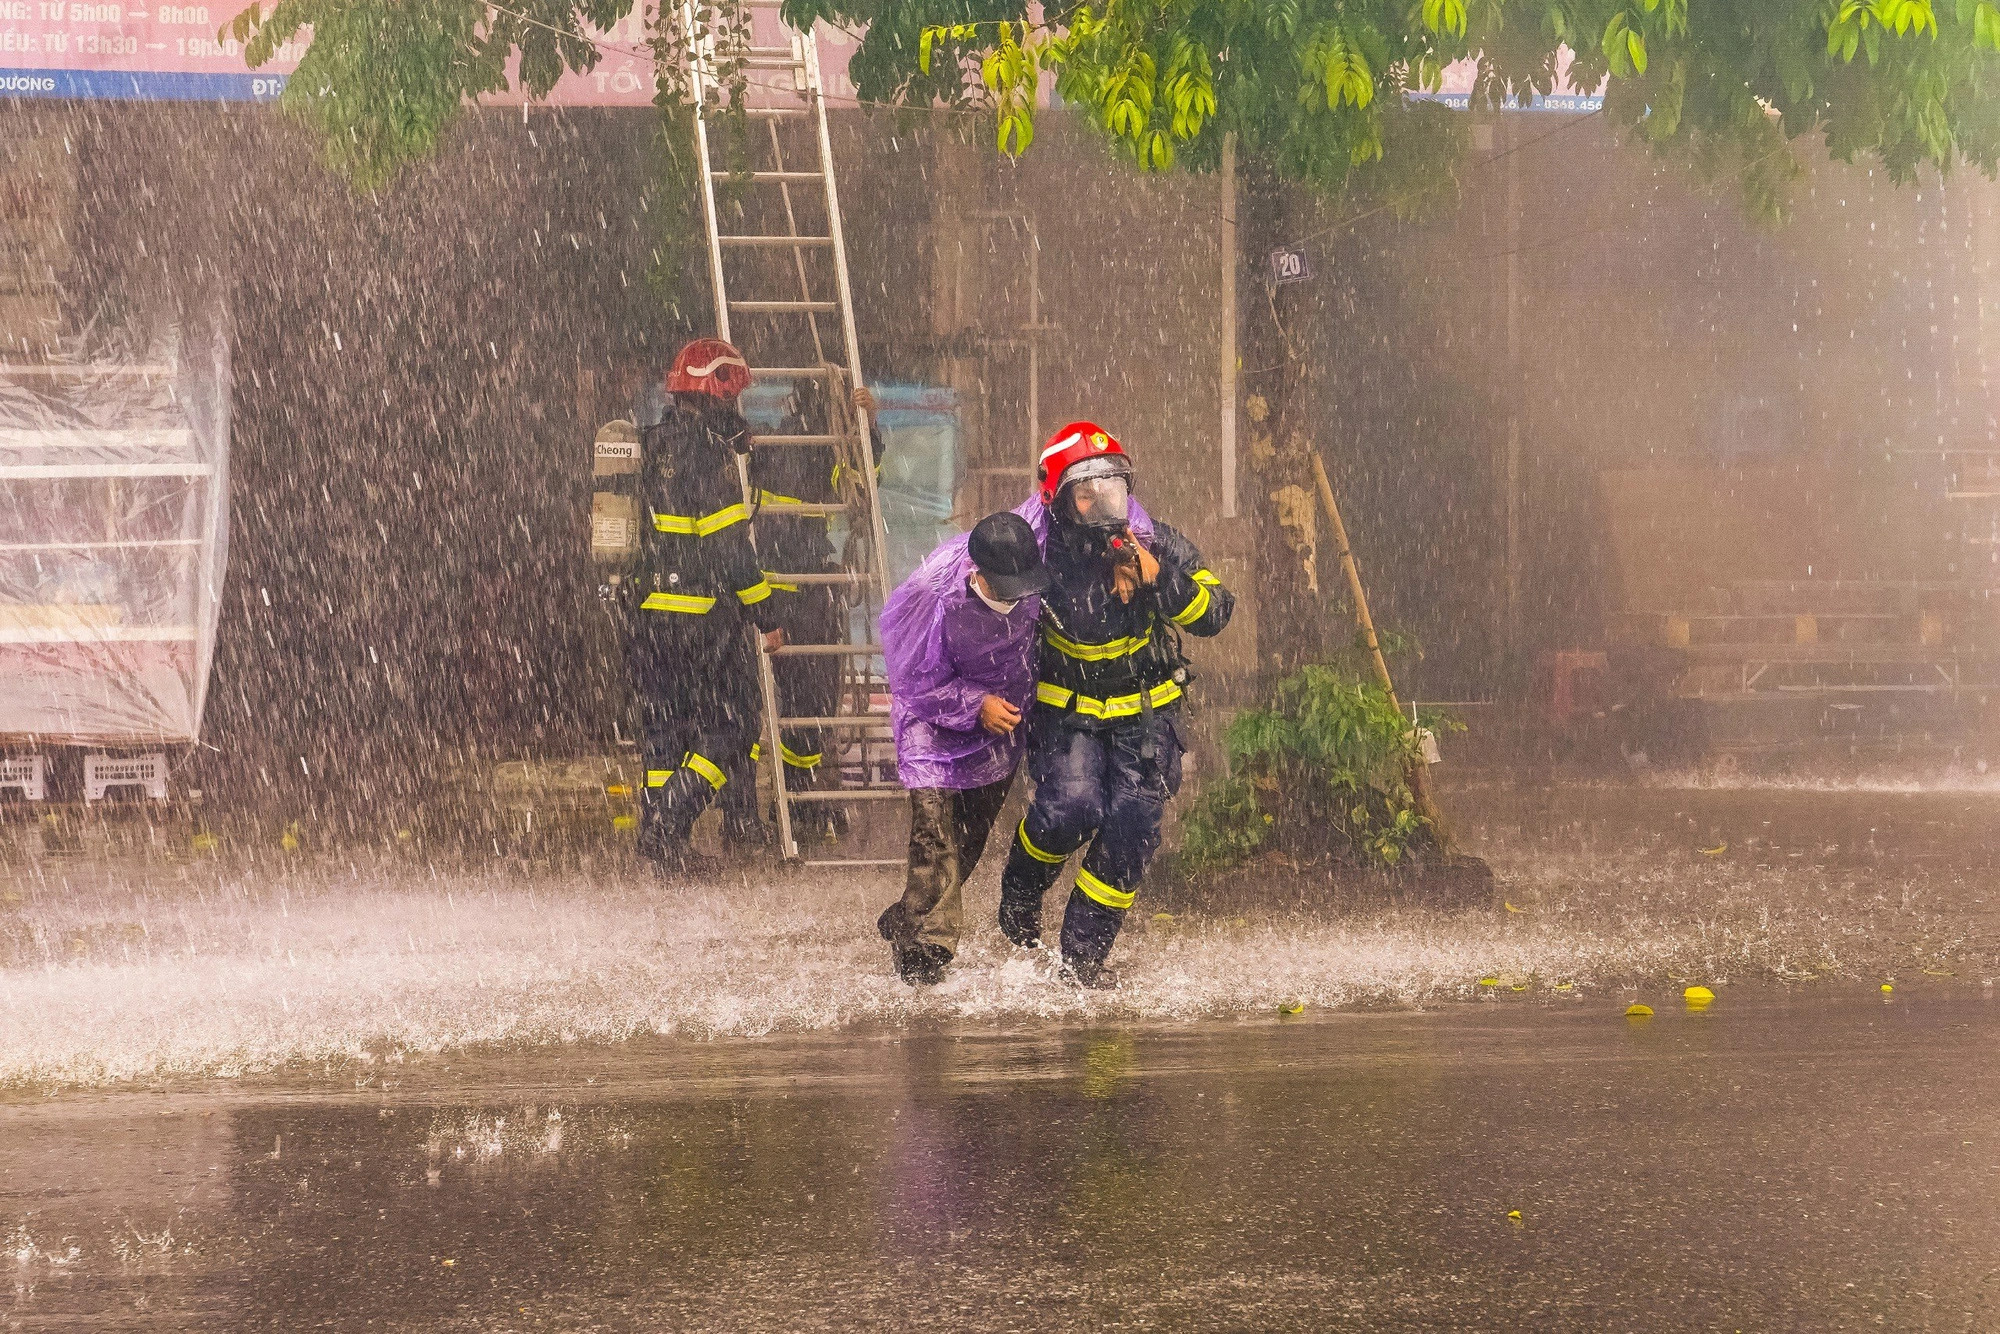 A firefighter evacuates a victim from the scene of a fire. Photo: D.Thanh / Tuoi Tre